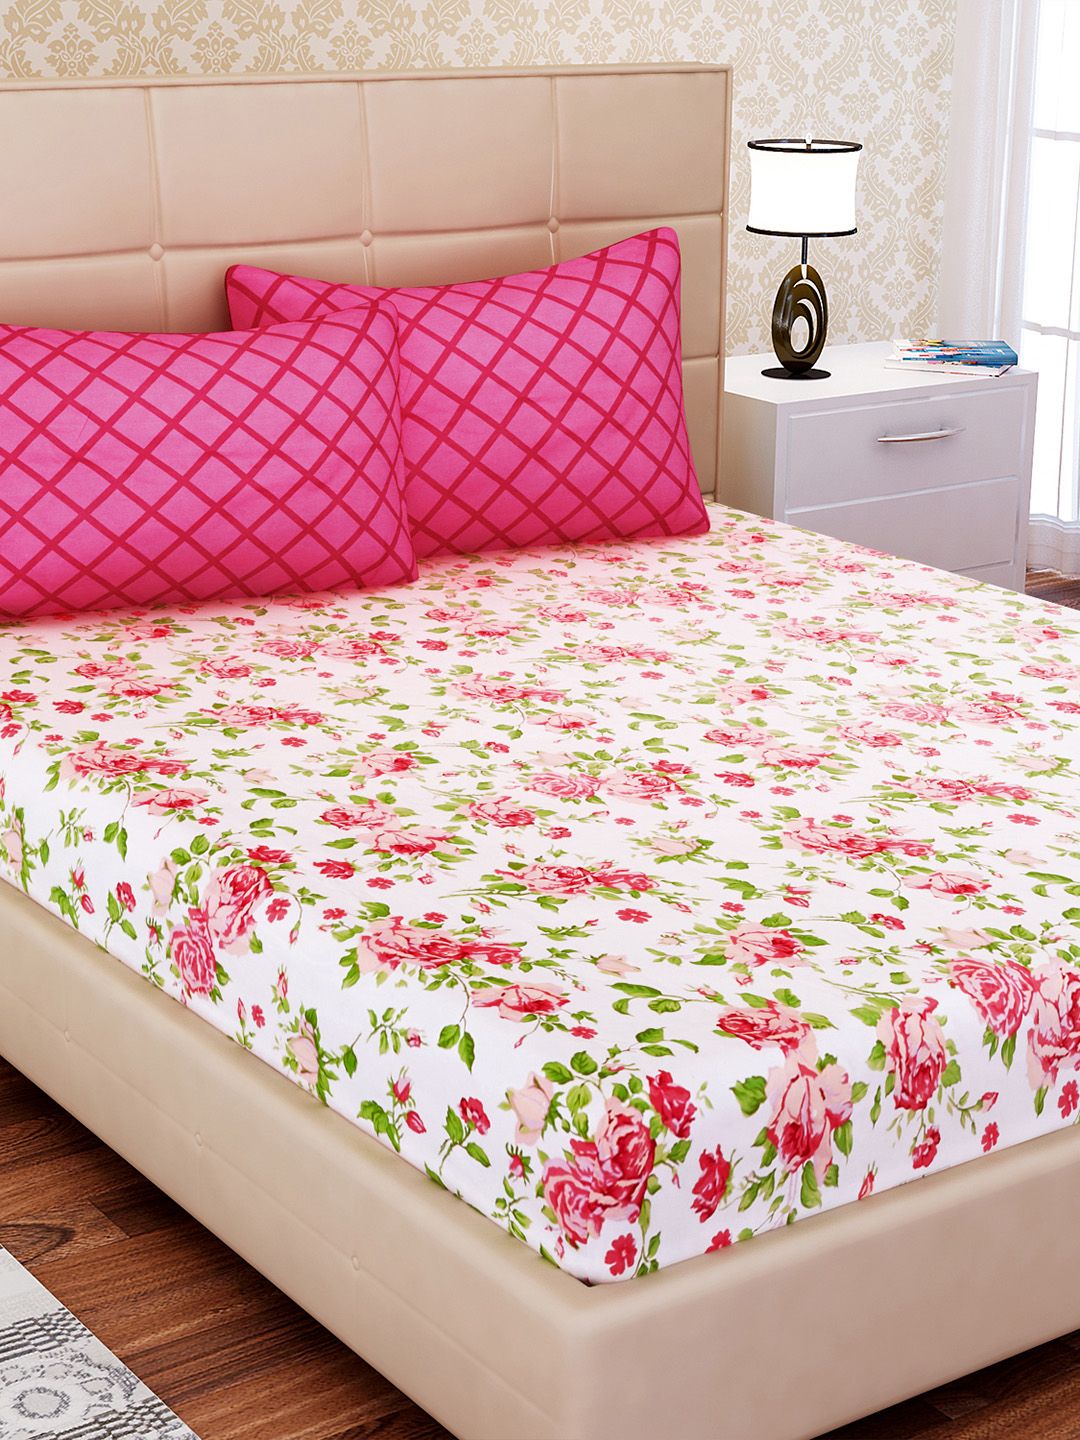 SEJ by Nisha Gupta White & Pink Floral 144 TC Cotton 1 King Bedsheet with 2 Pillow Covers Price in India